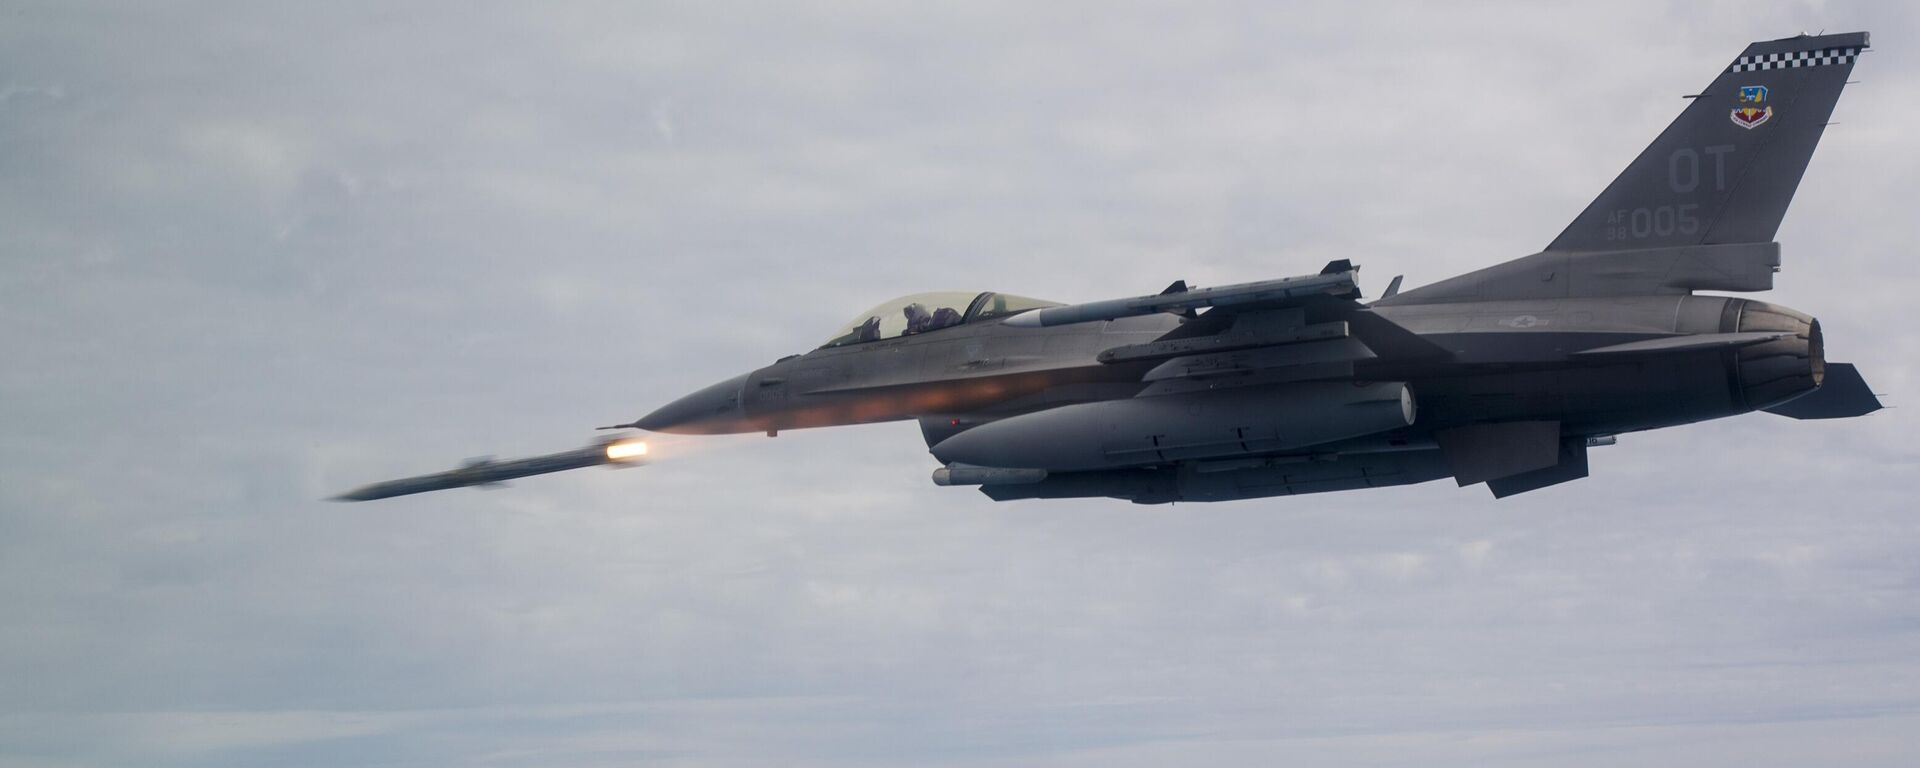 An F-16C Fighting Falcon assigned to the 85th Test Evaluation Squadron shoots an AIM-120 Advanced Medium-Range Air-to-Air Missile, or AMRAAM over testing ranges near Eglin Air Force Base, Fla., March 19, 2019. - Sputnik International, 1920, 14.02.2023